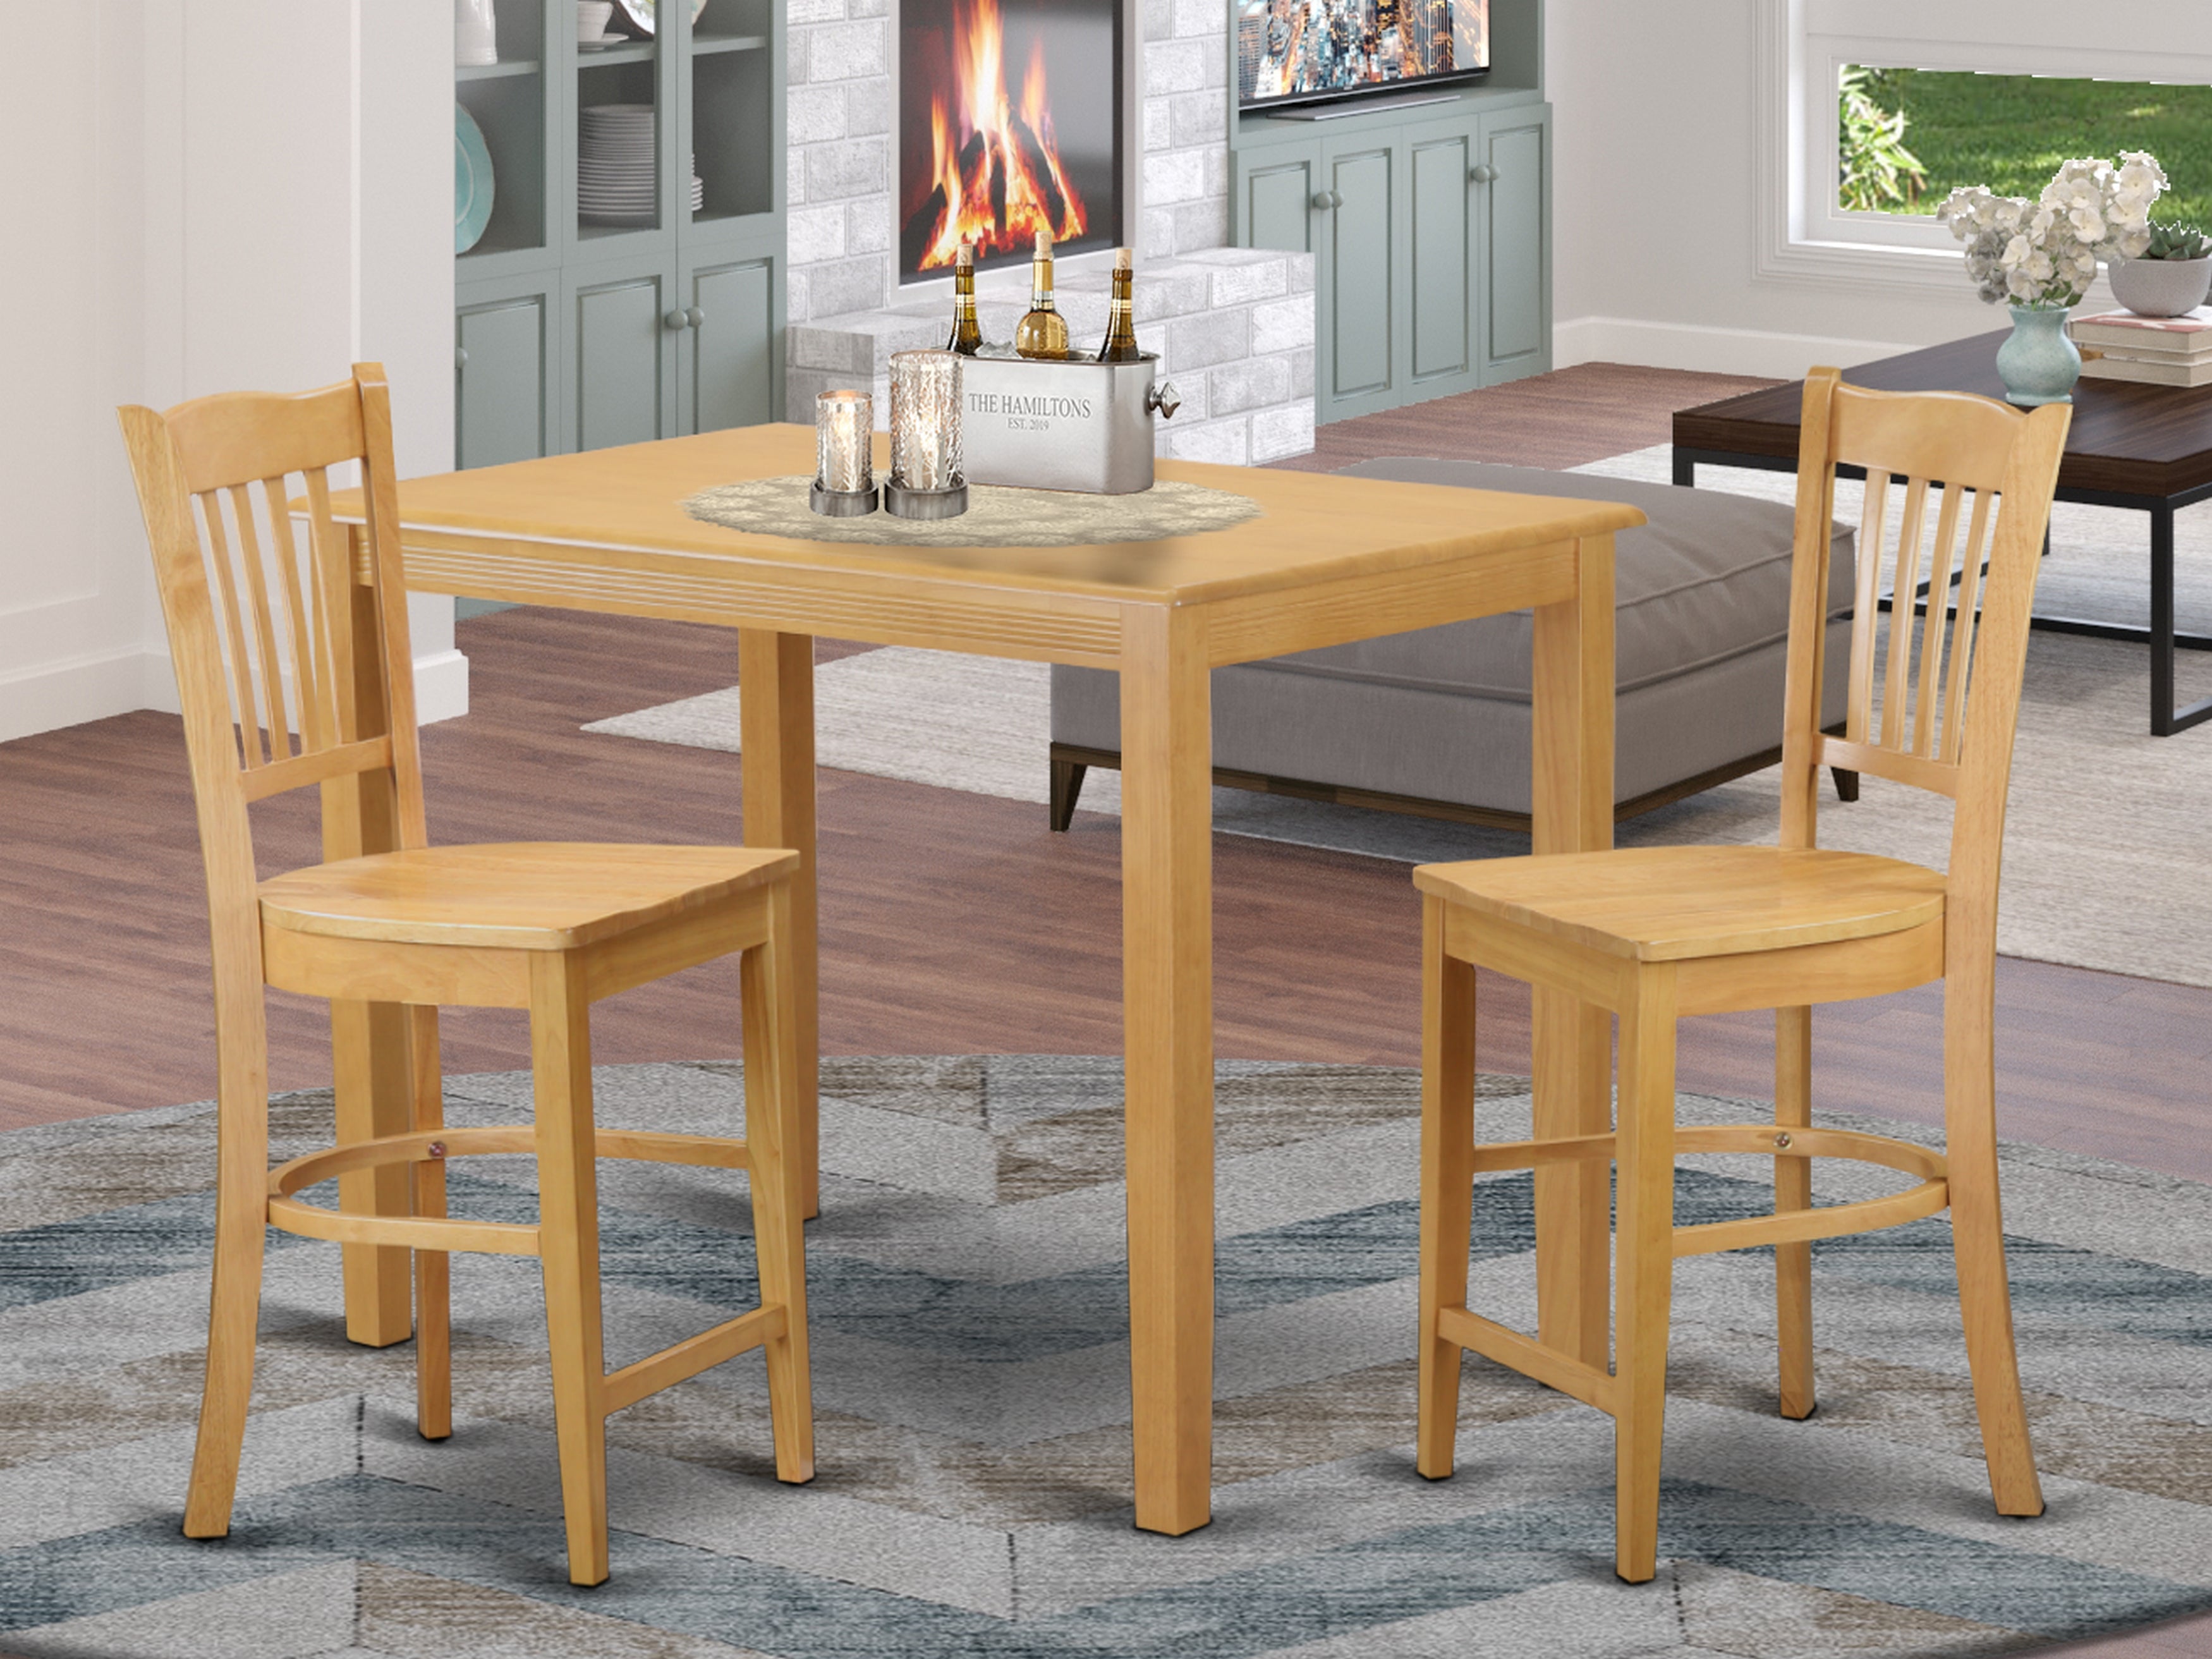 3 Pc Counter Height Dining Table and 2 Kitchen Chairs In Oak Finish.